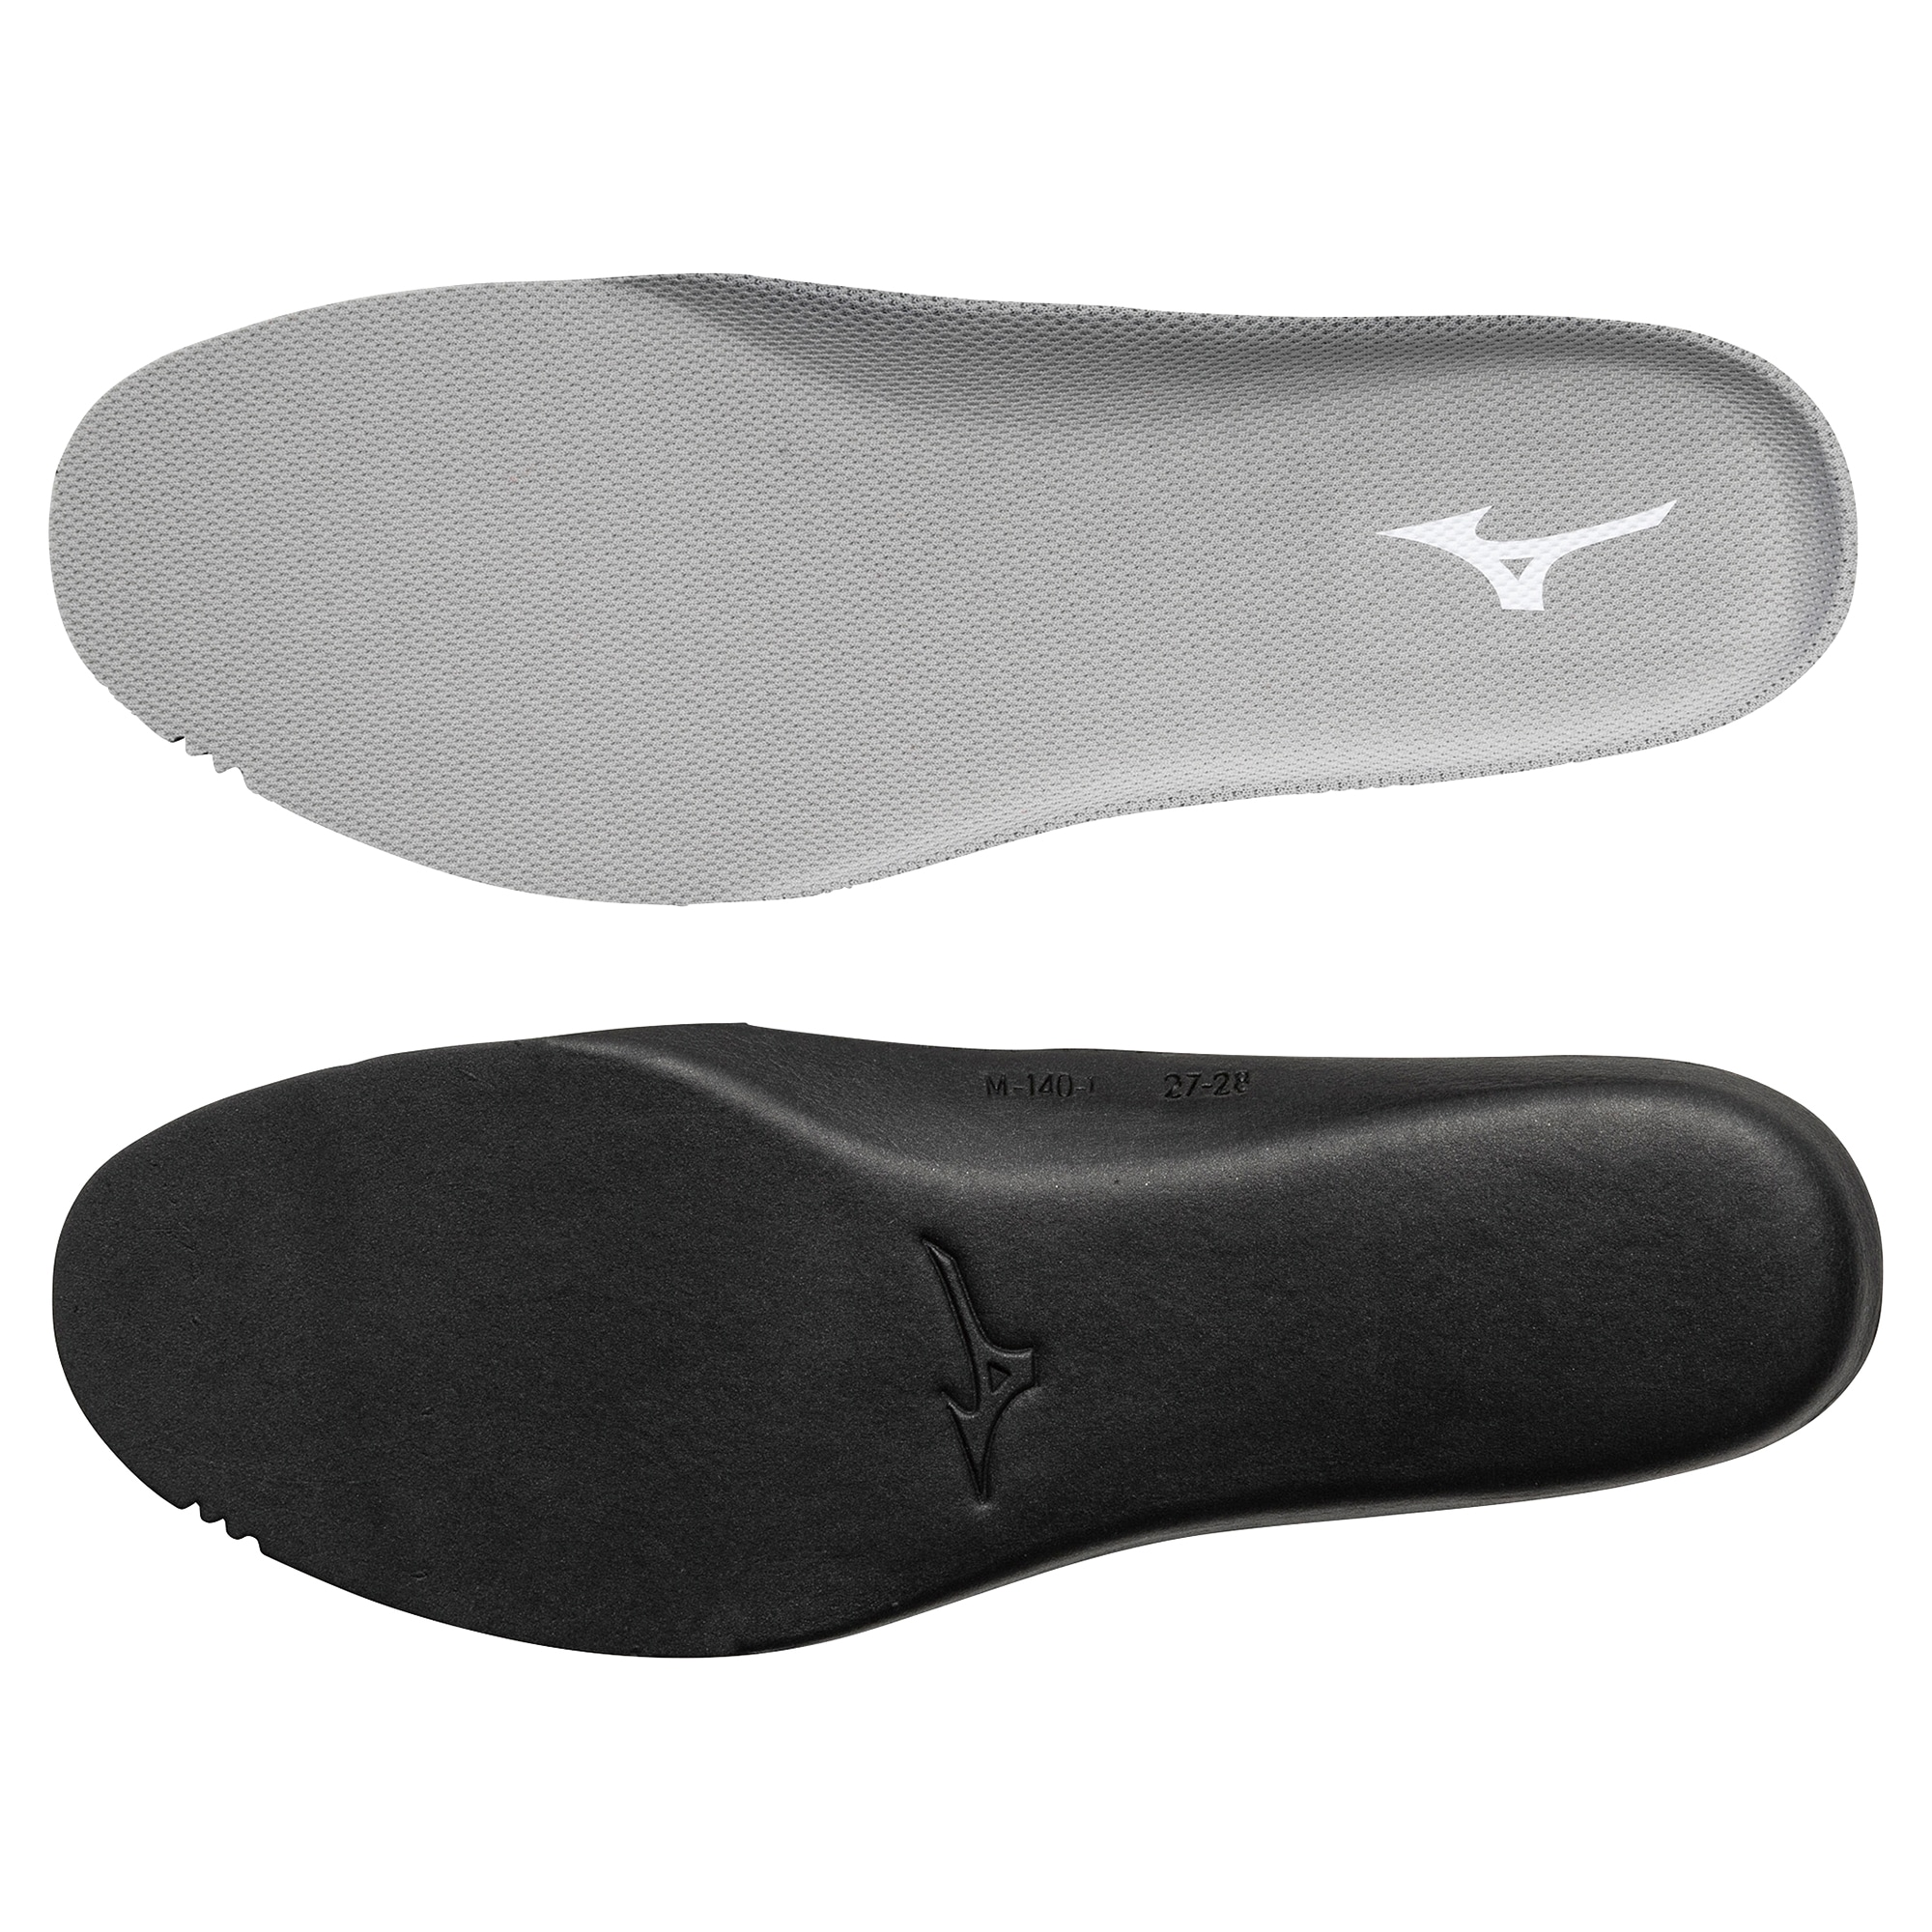 ANTIMICROBIAL DEODORANT CUP INSOLE